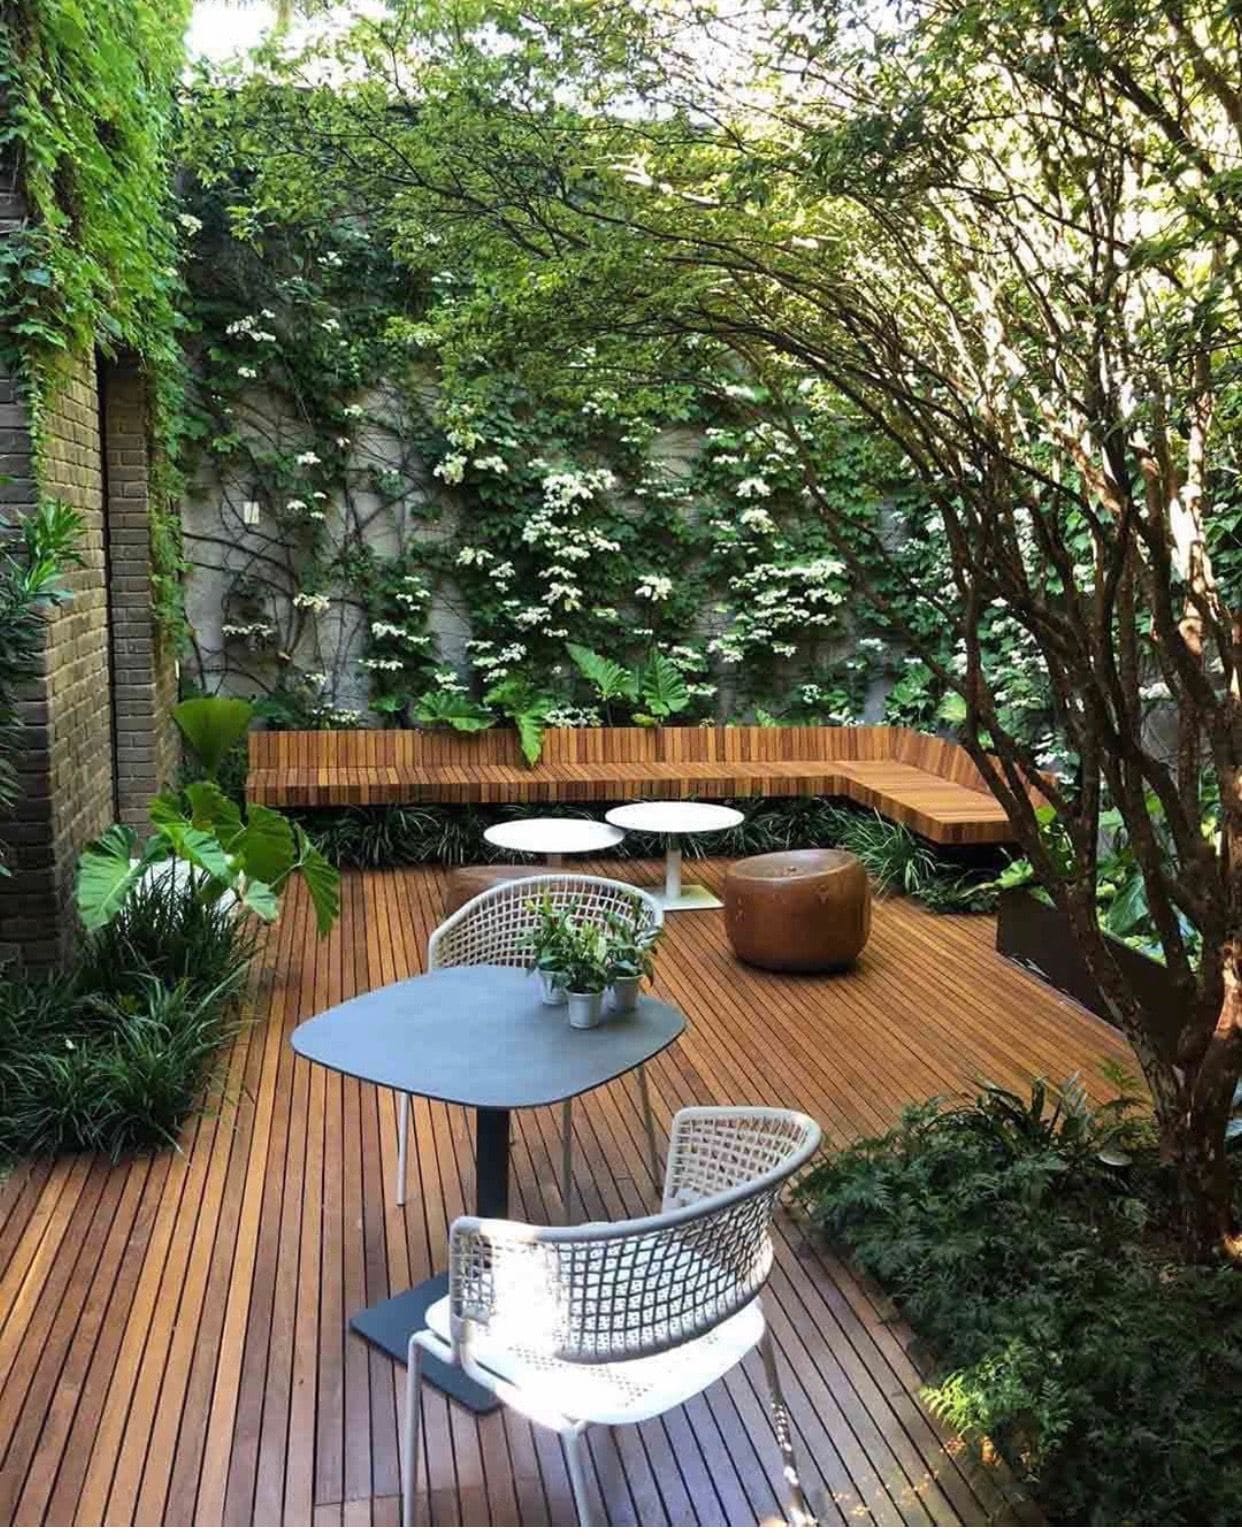 17 stunning garden ideas to revitalize your yard